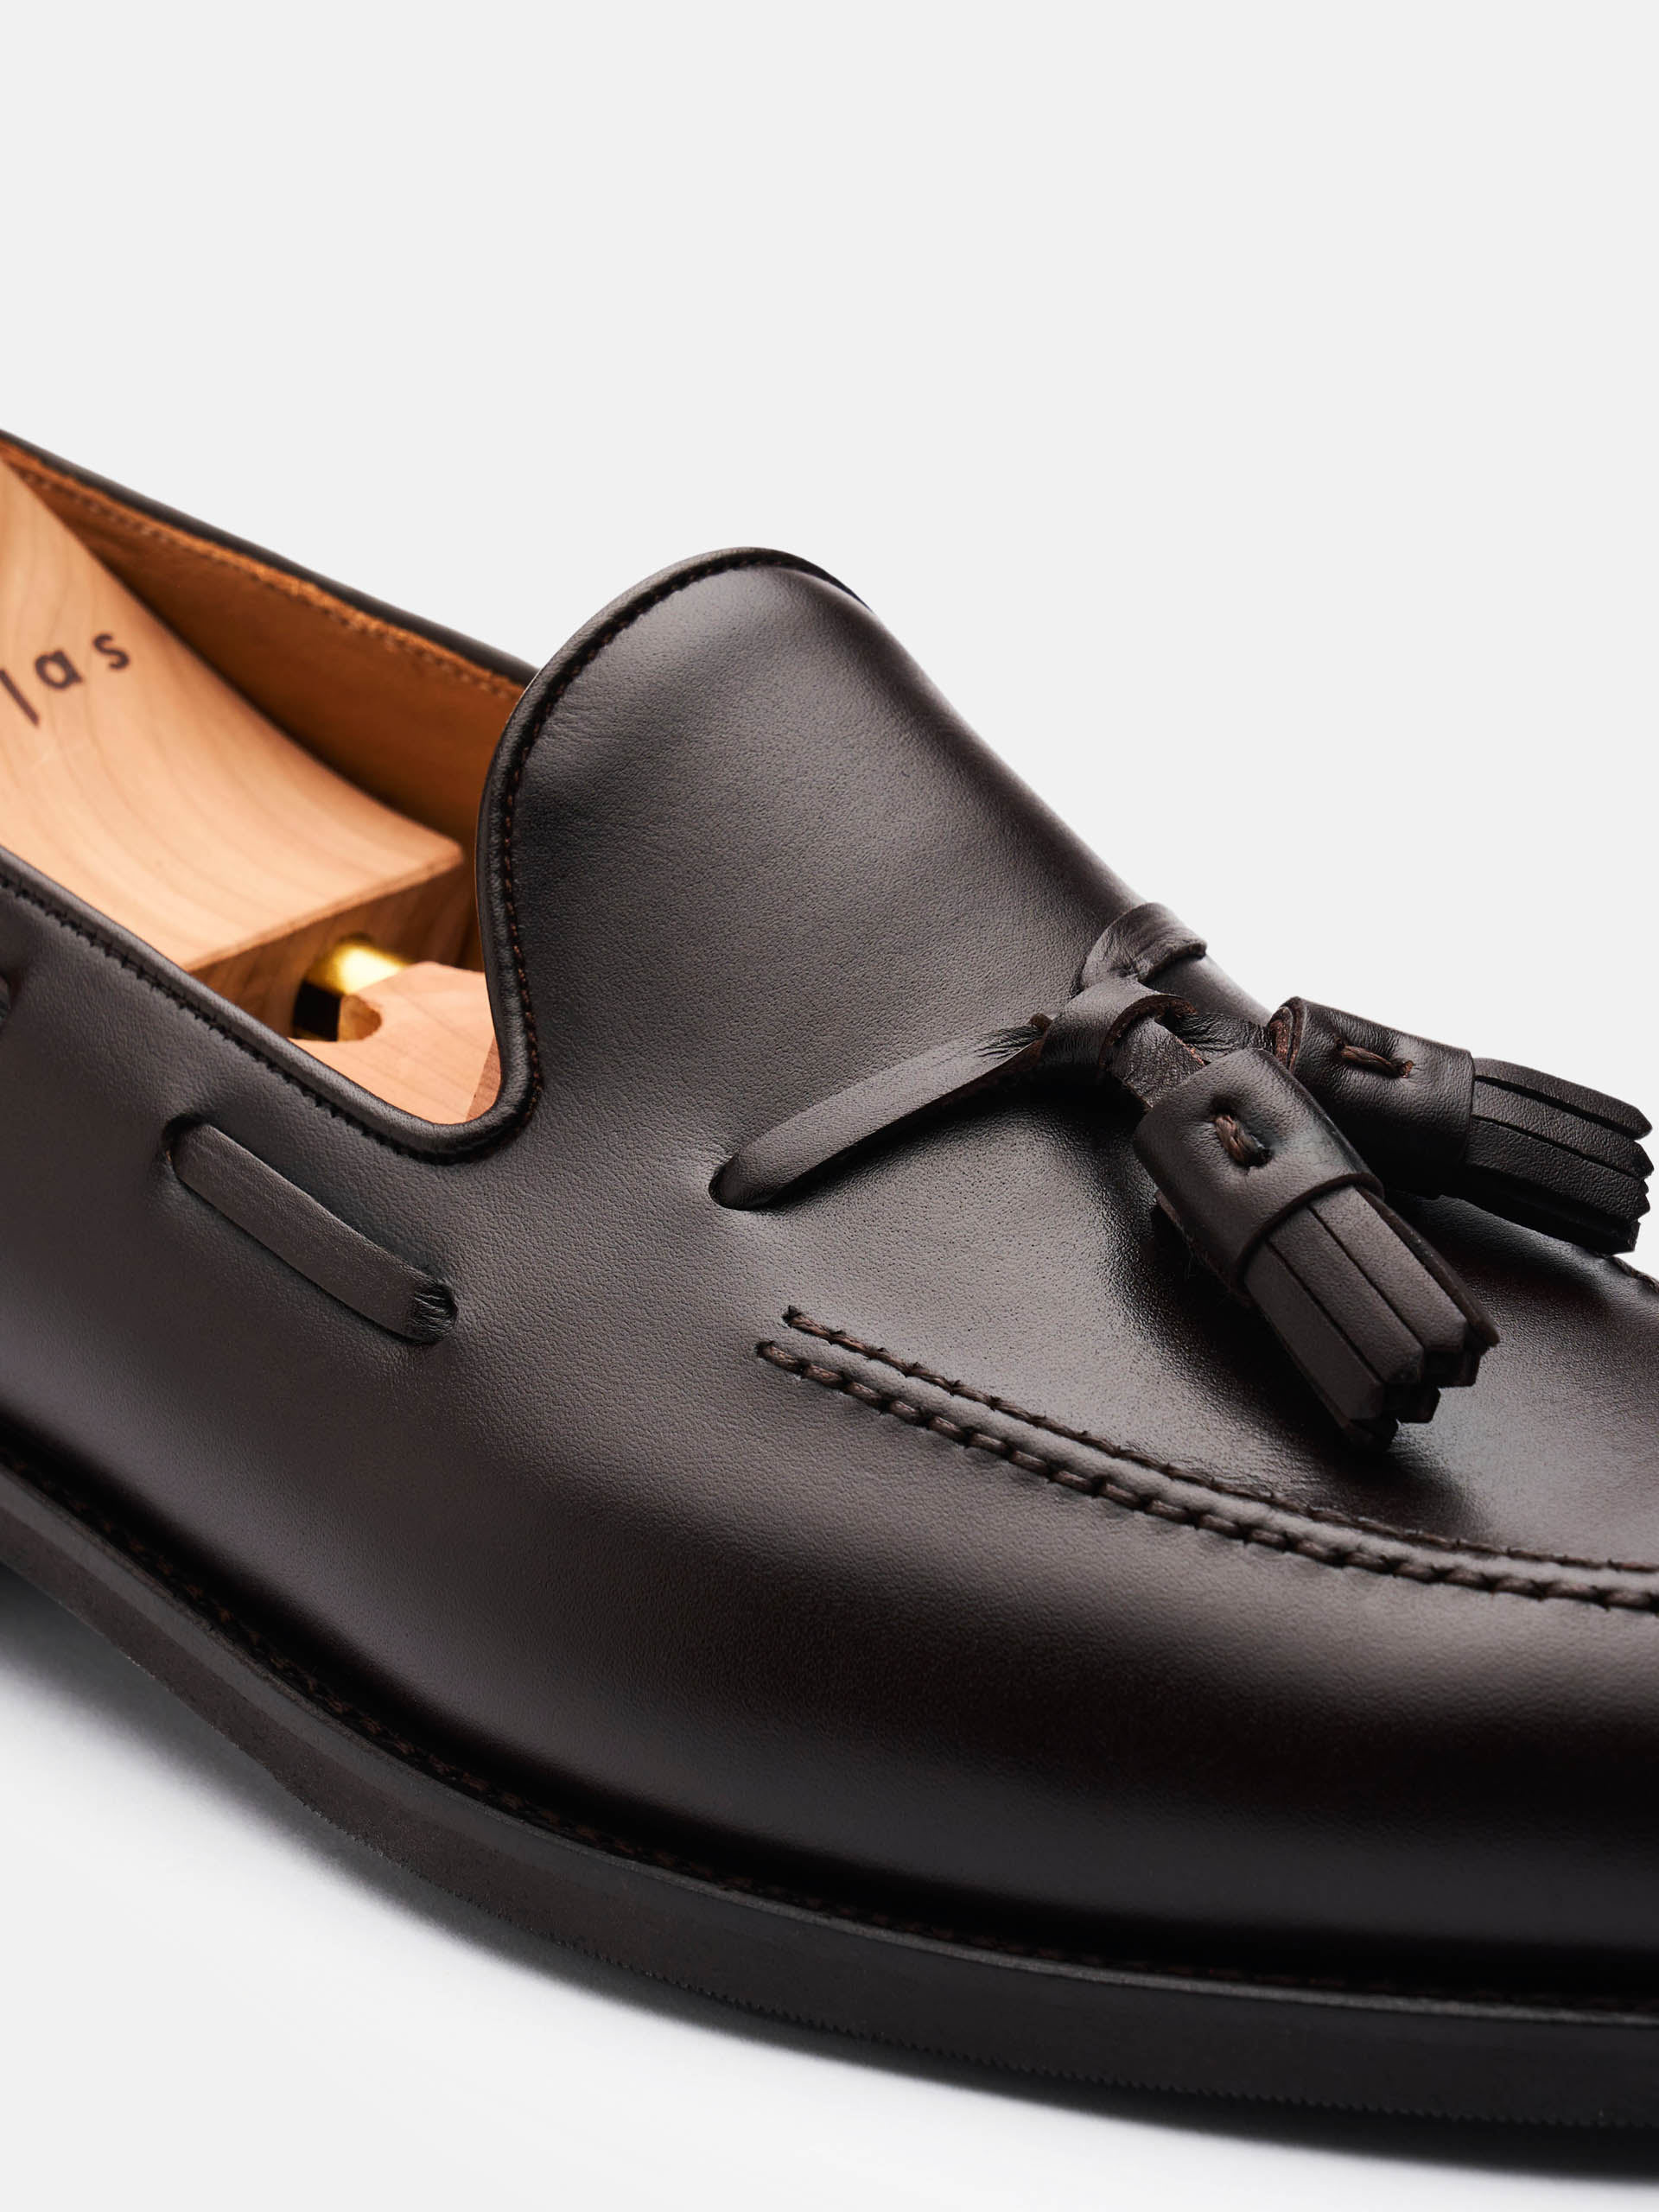 Tassel Loafers: Classic and Stylish Footwear Options for Every Occasion